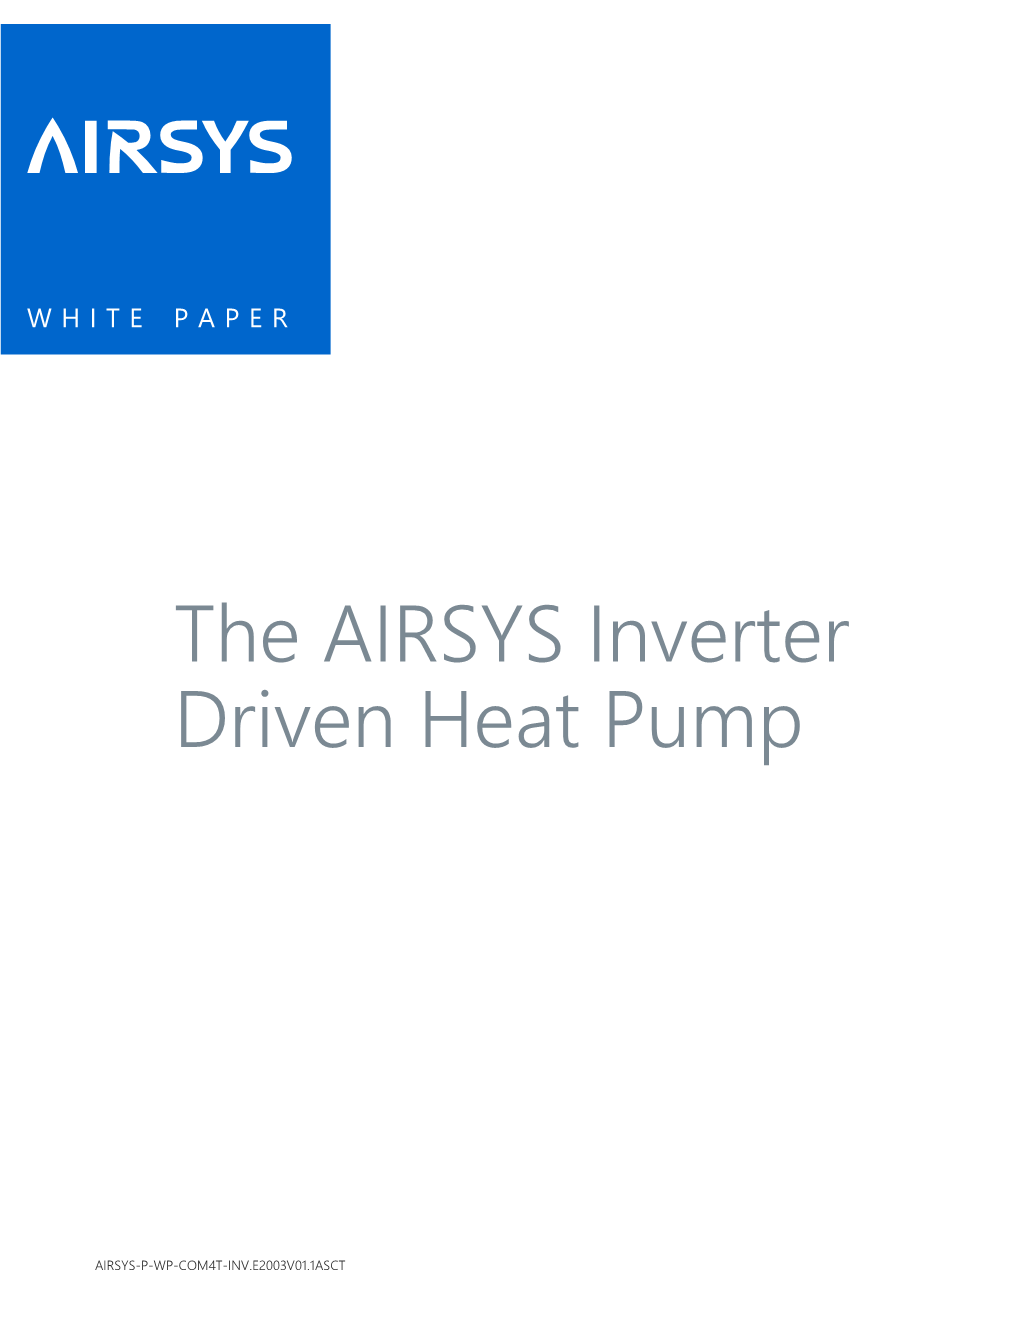 The AIRSYS Inverter Driven Heat Pump